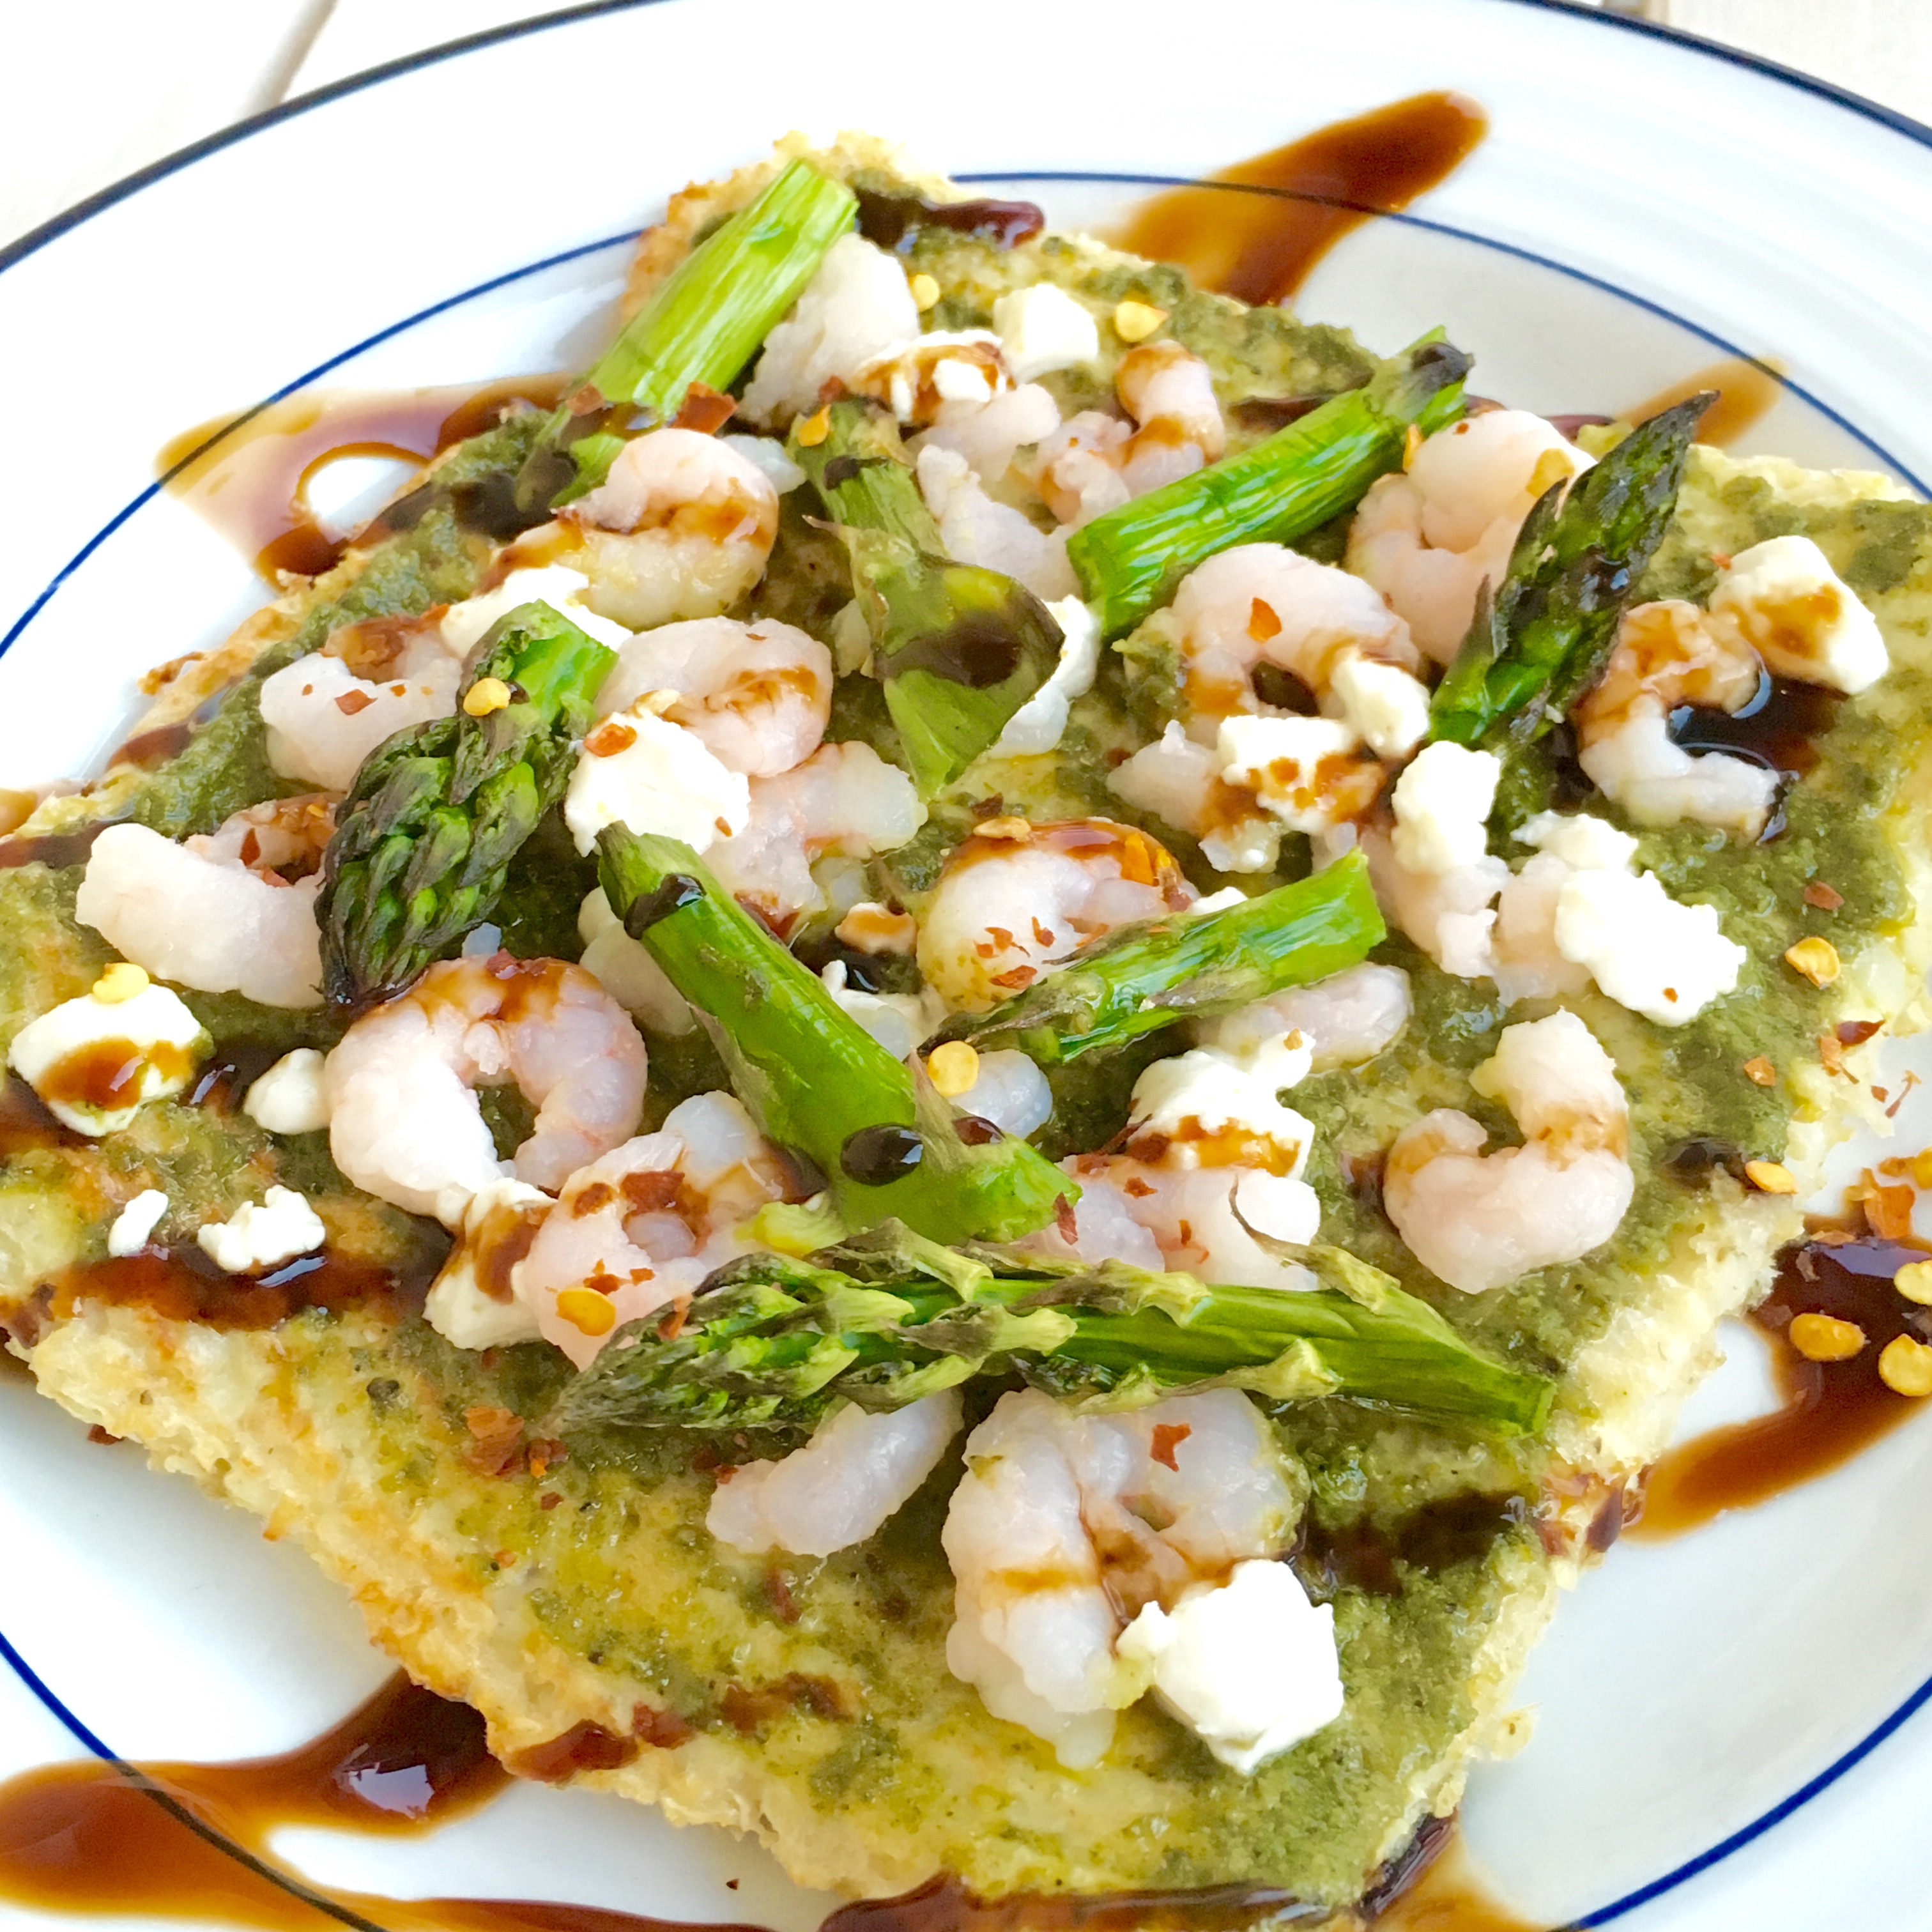 Walnut pesto and shrimp with asparagus on this gluten-free, dairy-free cauliflower crust is the perfect light bite for spring!